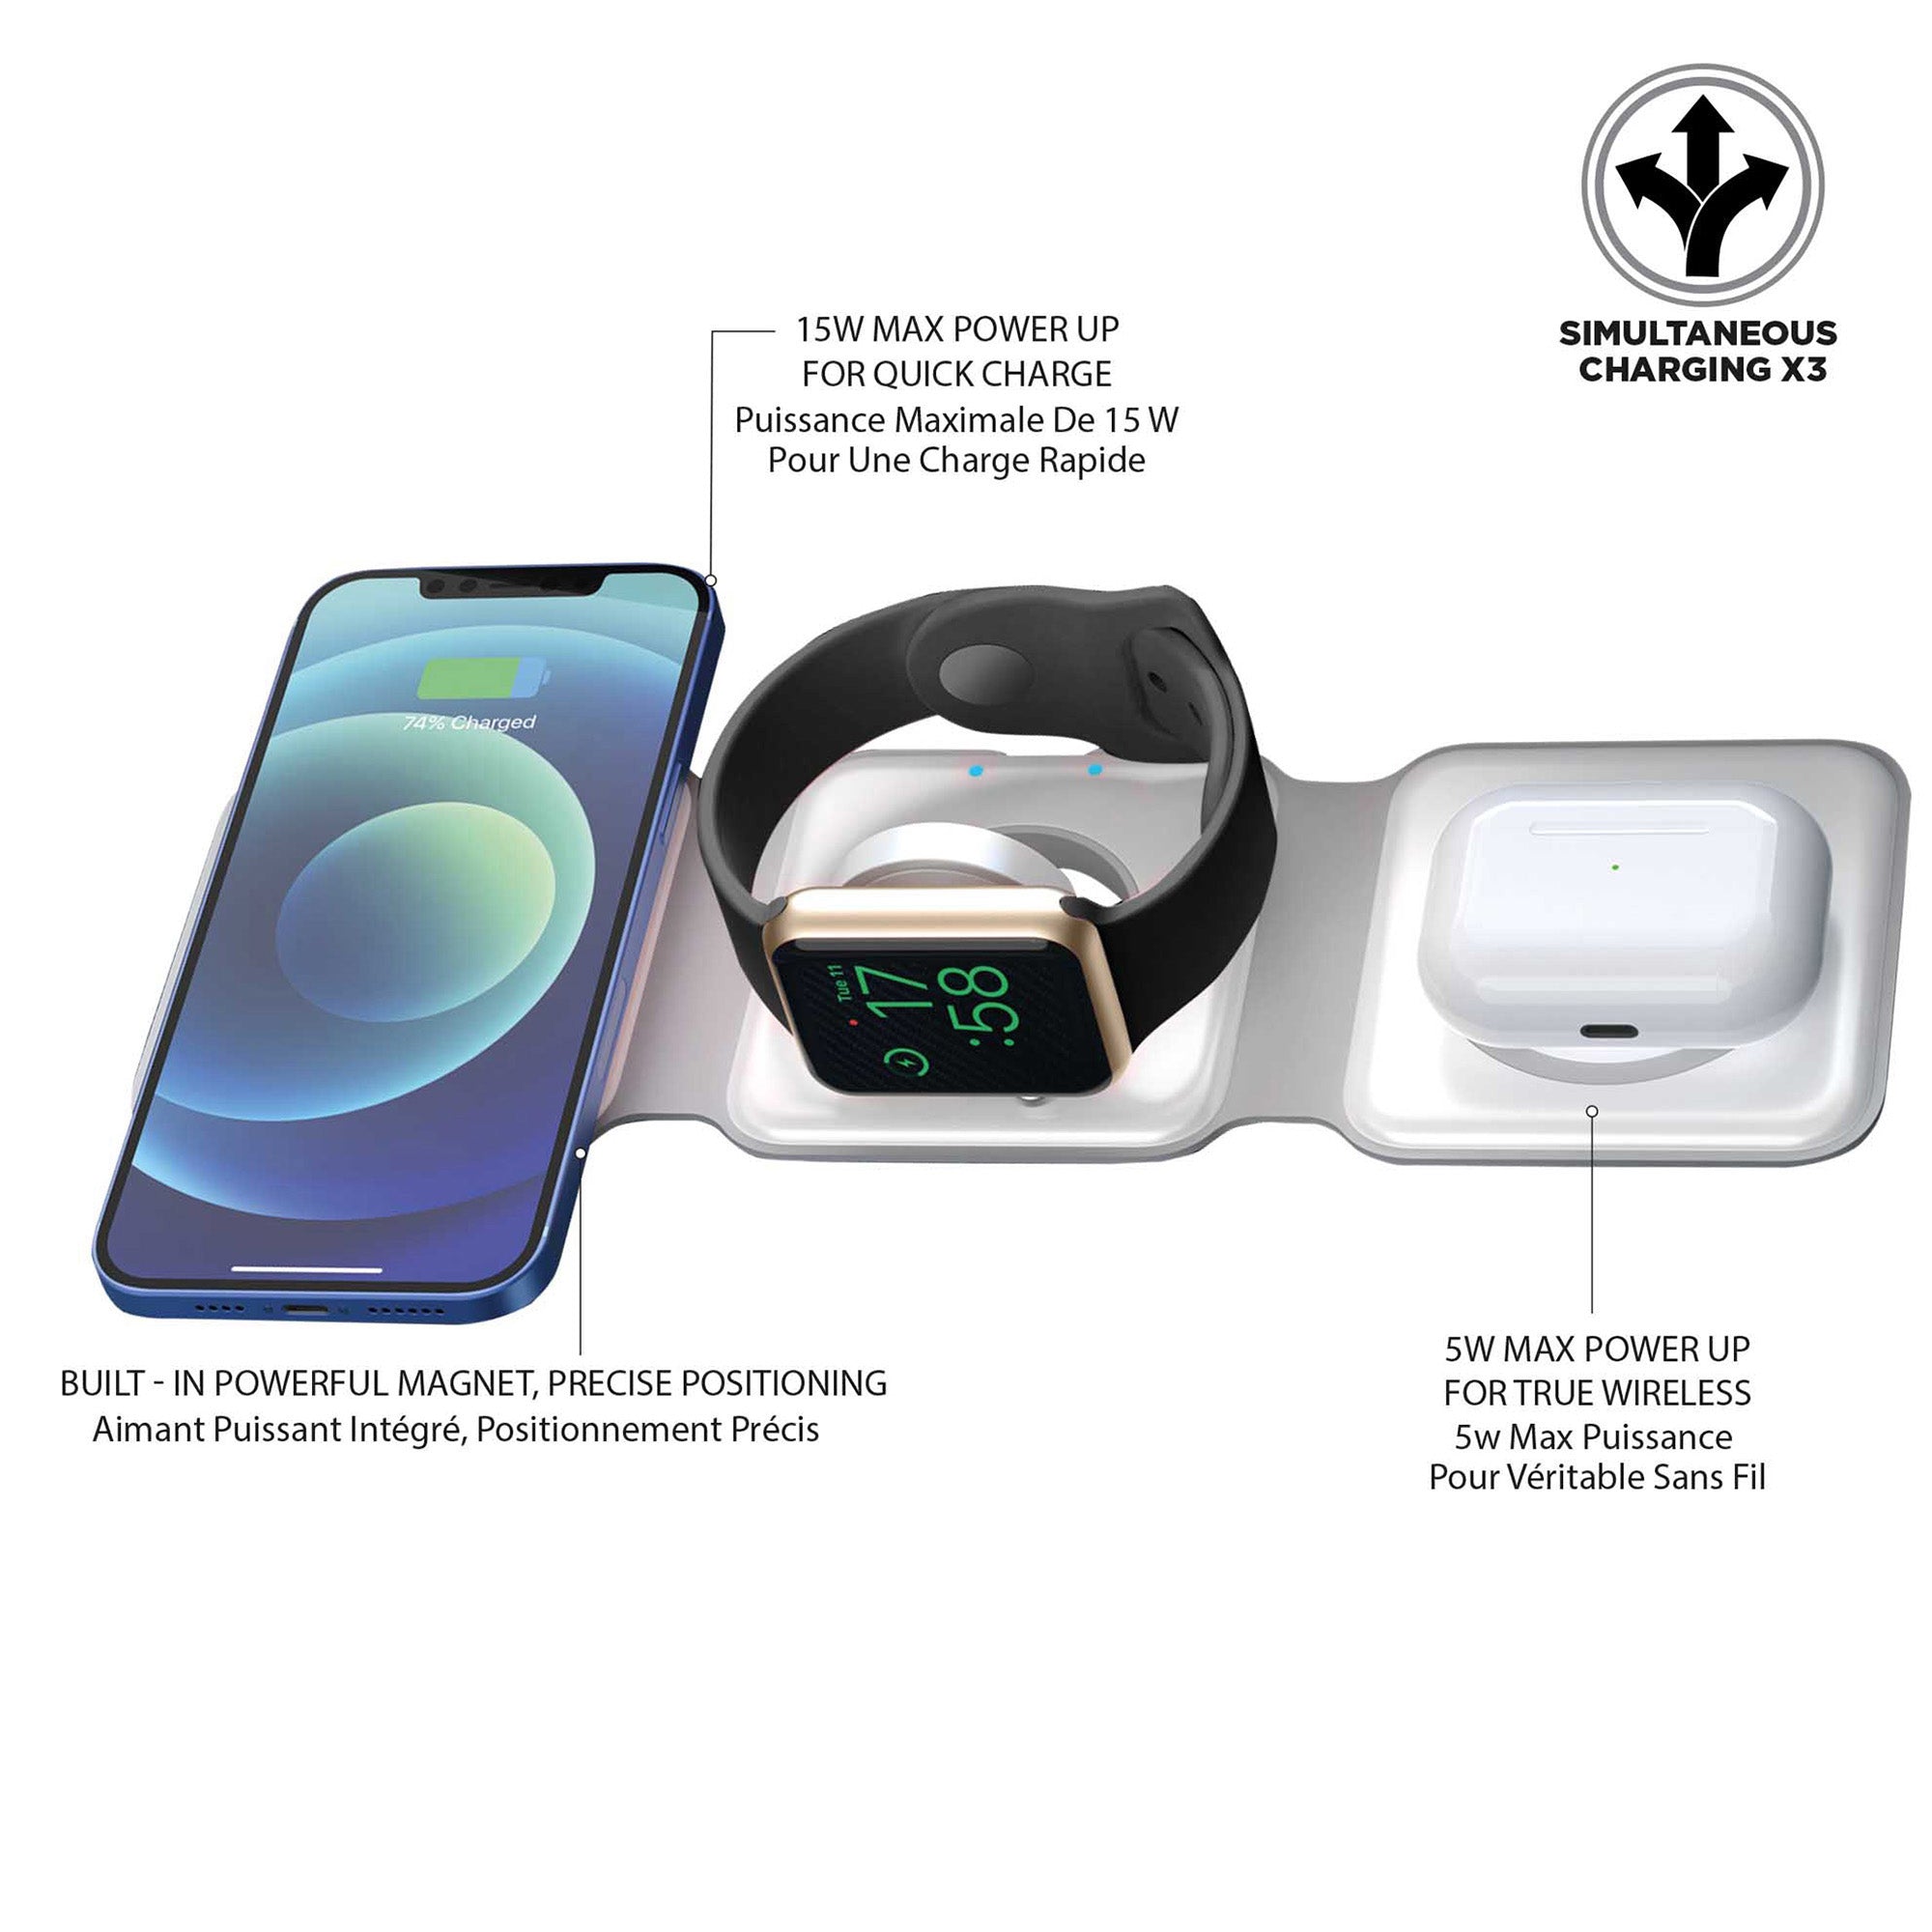 Uunique 15W Trio 3in1 Magnetic Foldable Wireless Charger - White - 15-09232